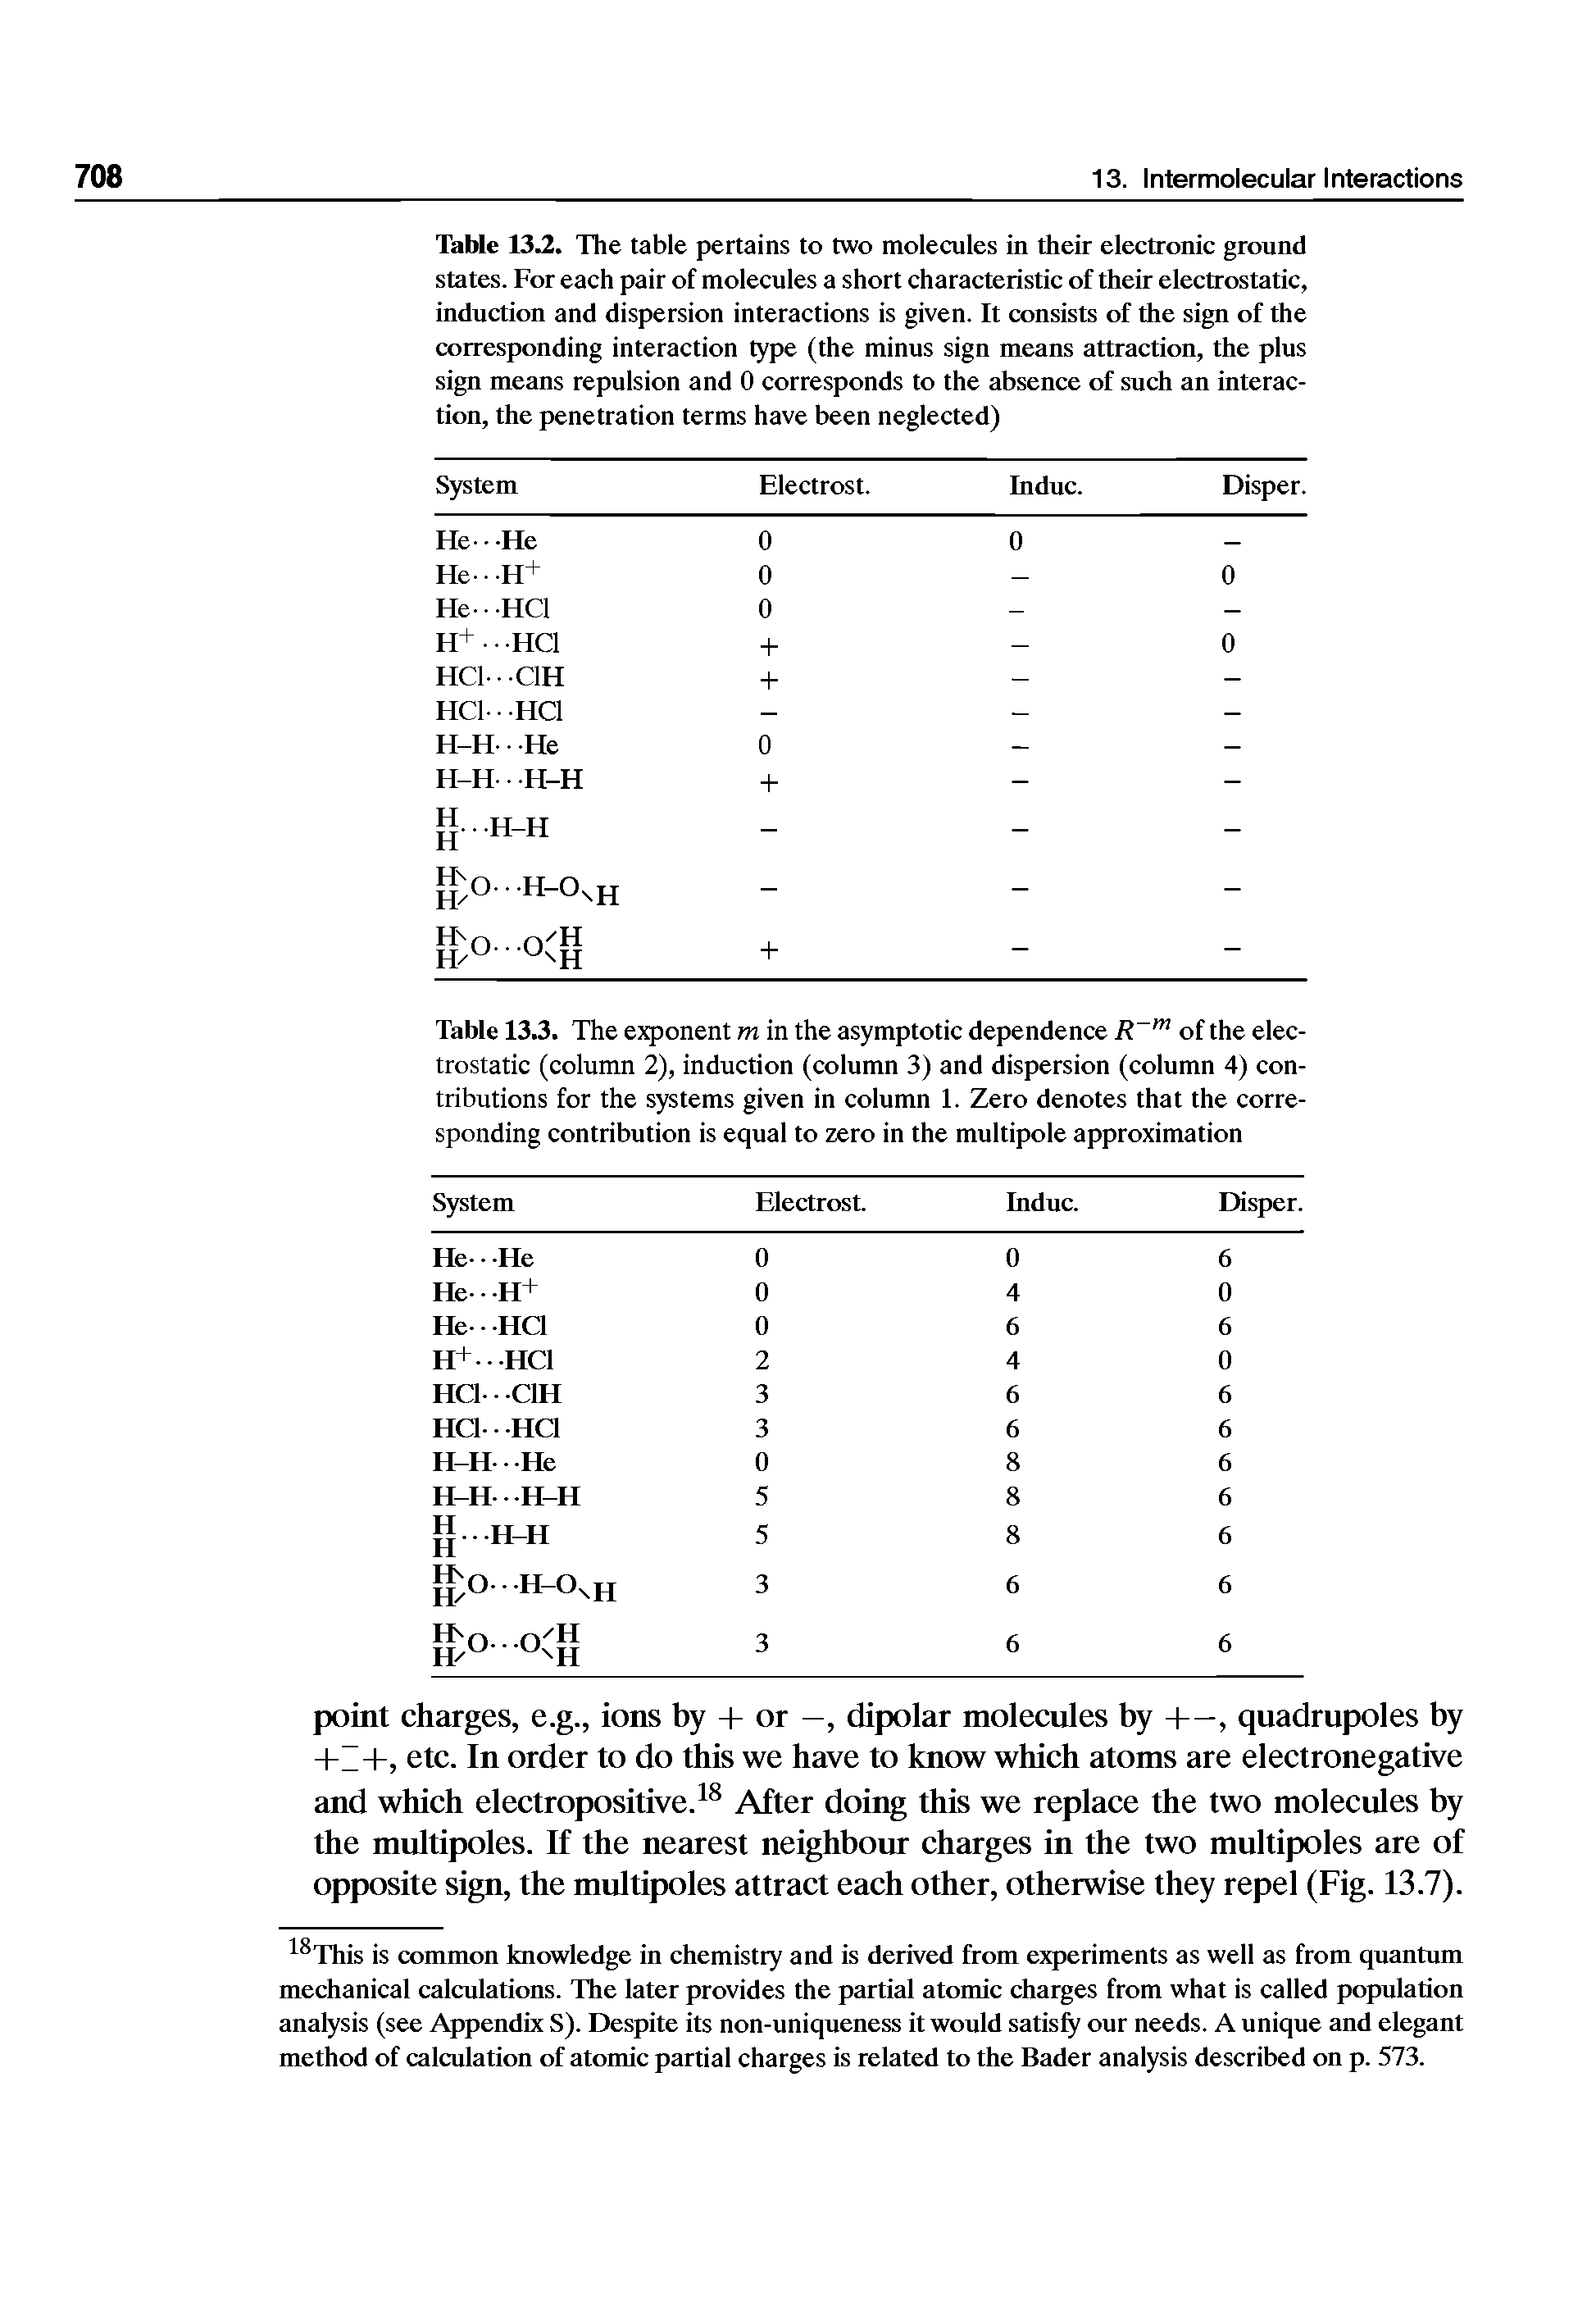 Table 13J. The table pertains to two molecules in their eleetronie ground states. For each pair of molecules a short characteristic of their electrostatic, induction and dispersion interactions is given. It consists of the sign of the corresponding interaction type (the minus sign means attraction, the plus sign means repulsion and 0 corresponds to the absence of such an interaction, the penetration terms have been neglected)...